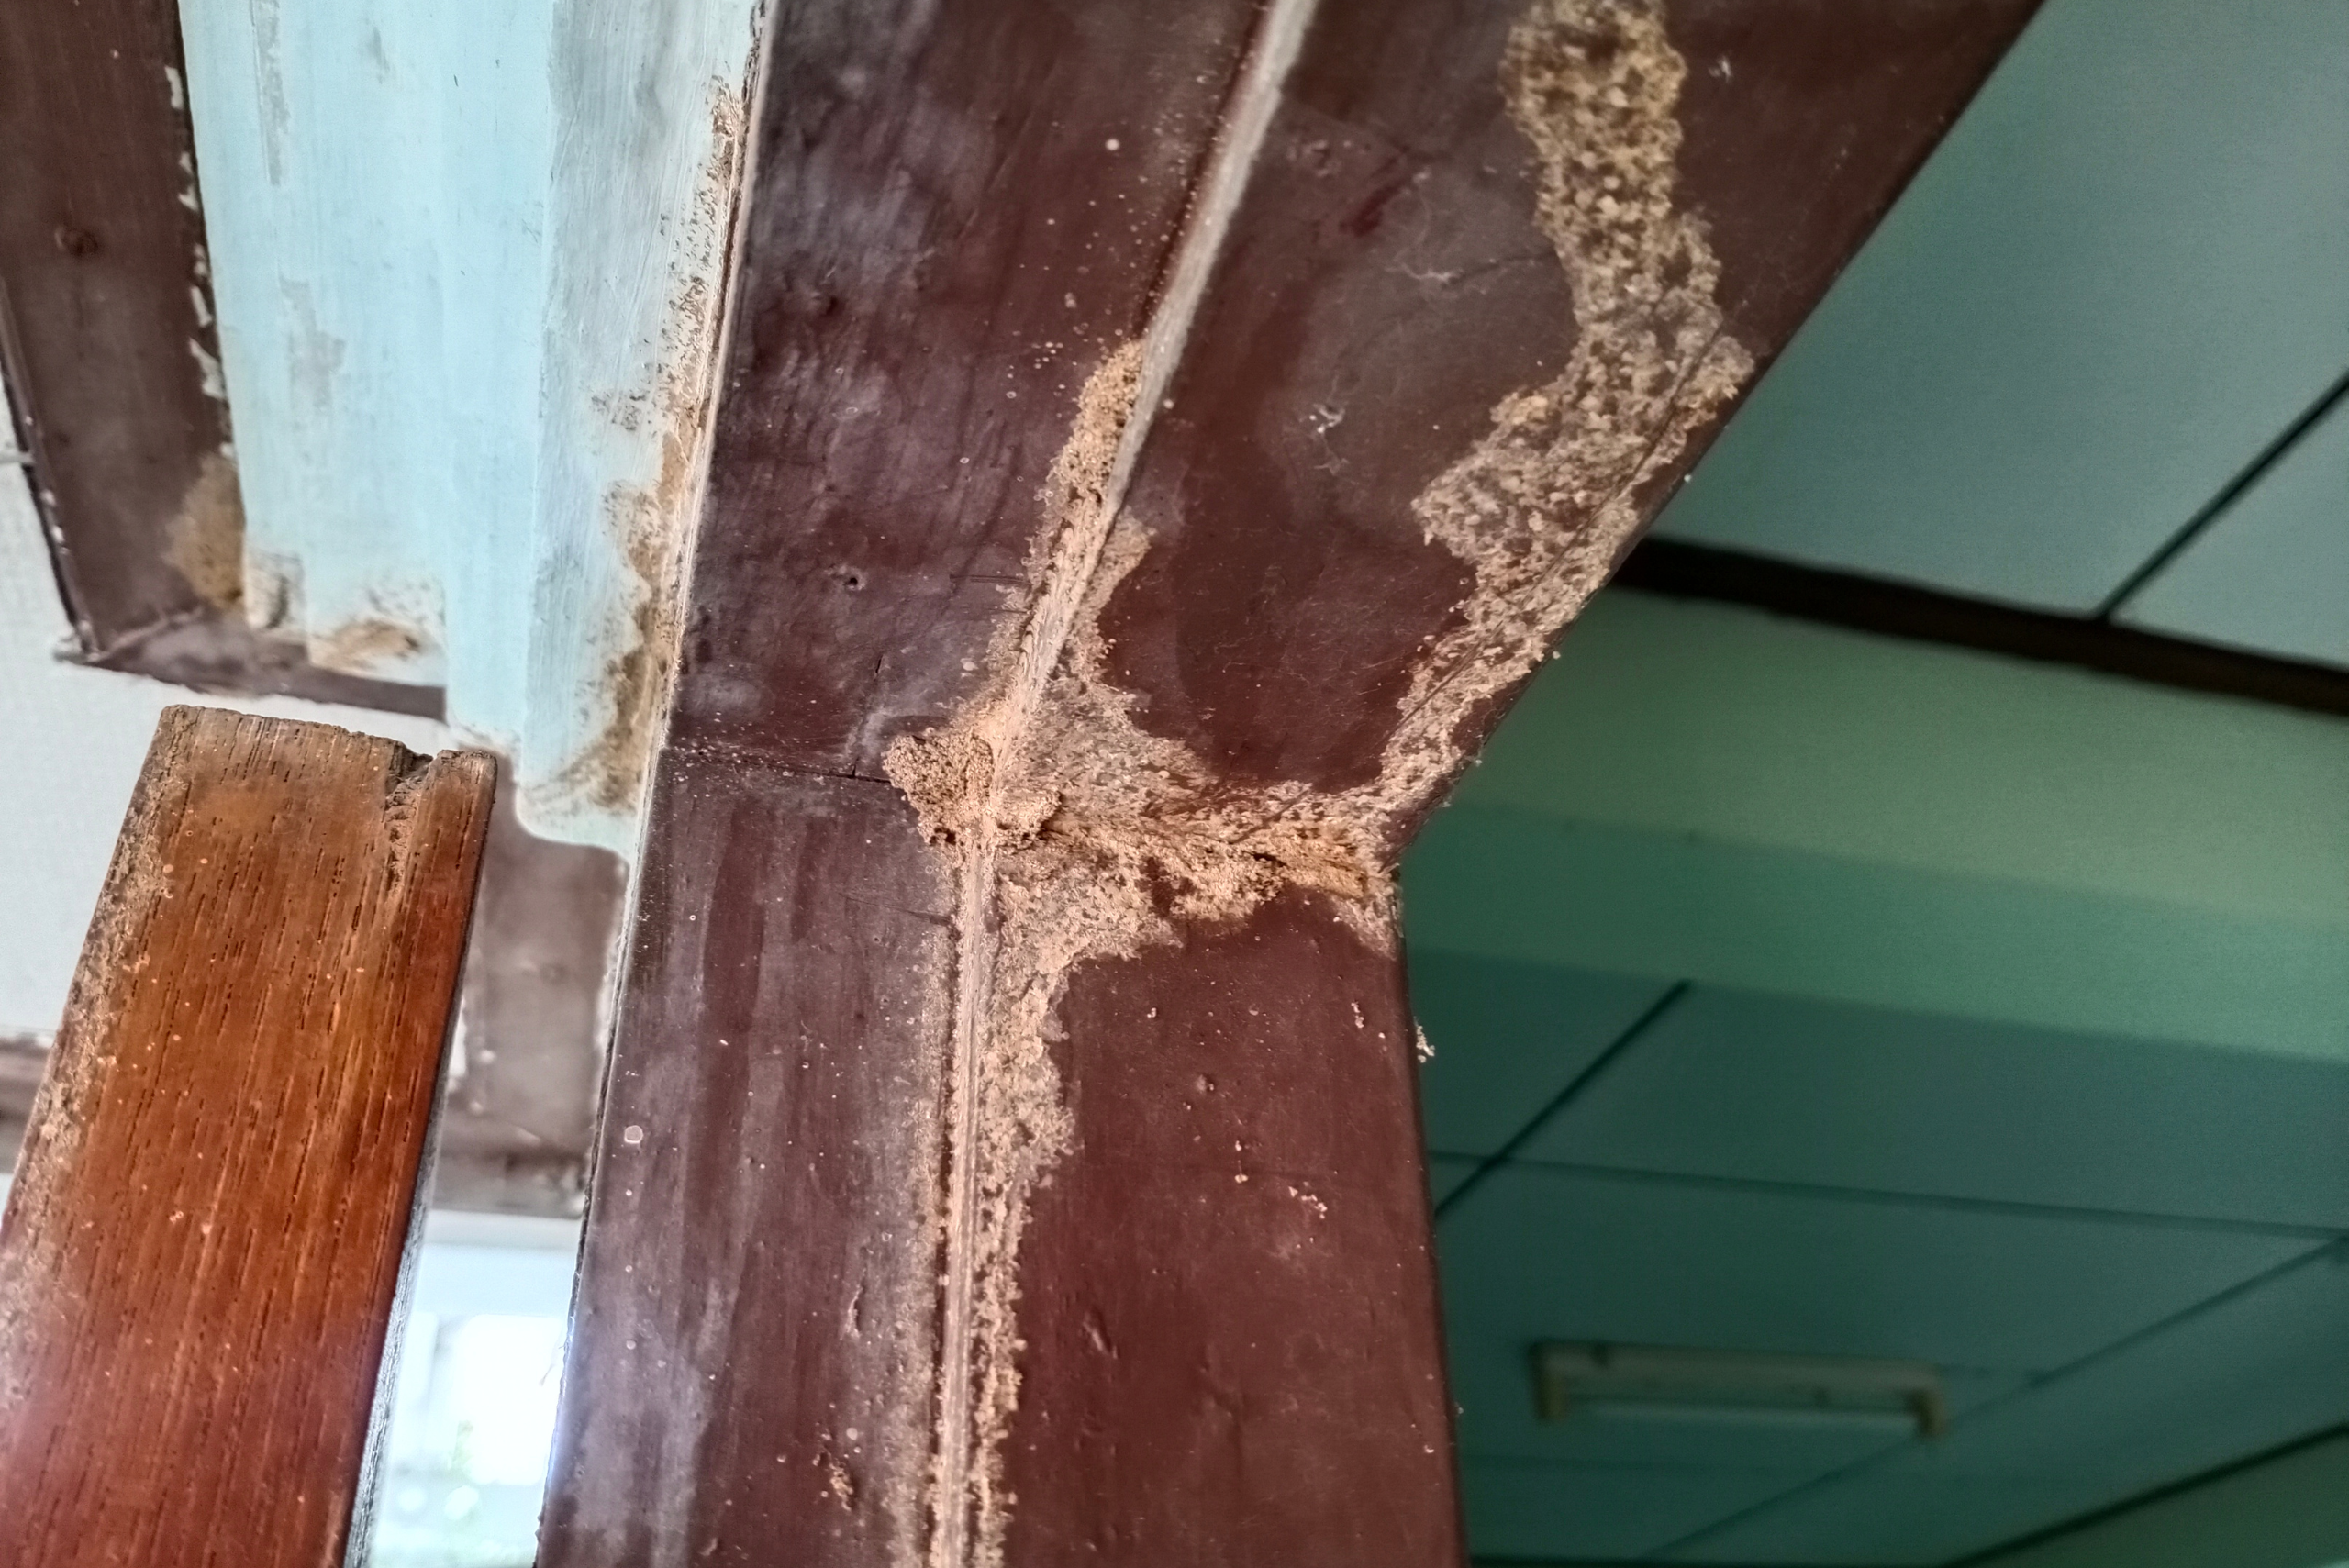 A corner of a wooden door frame damaged by termites.